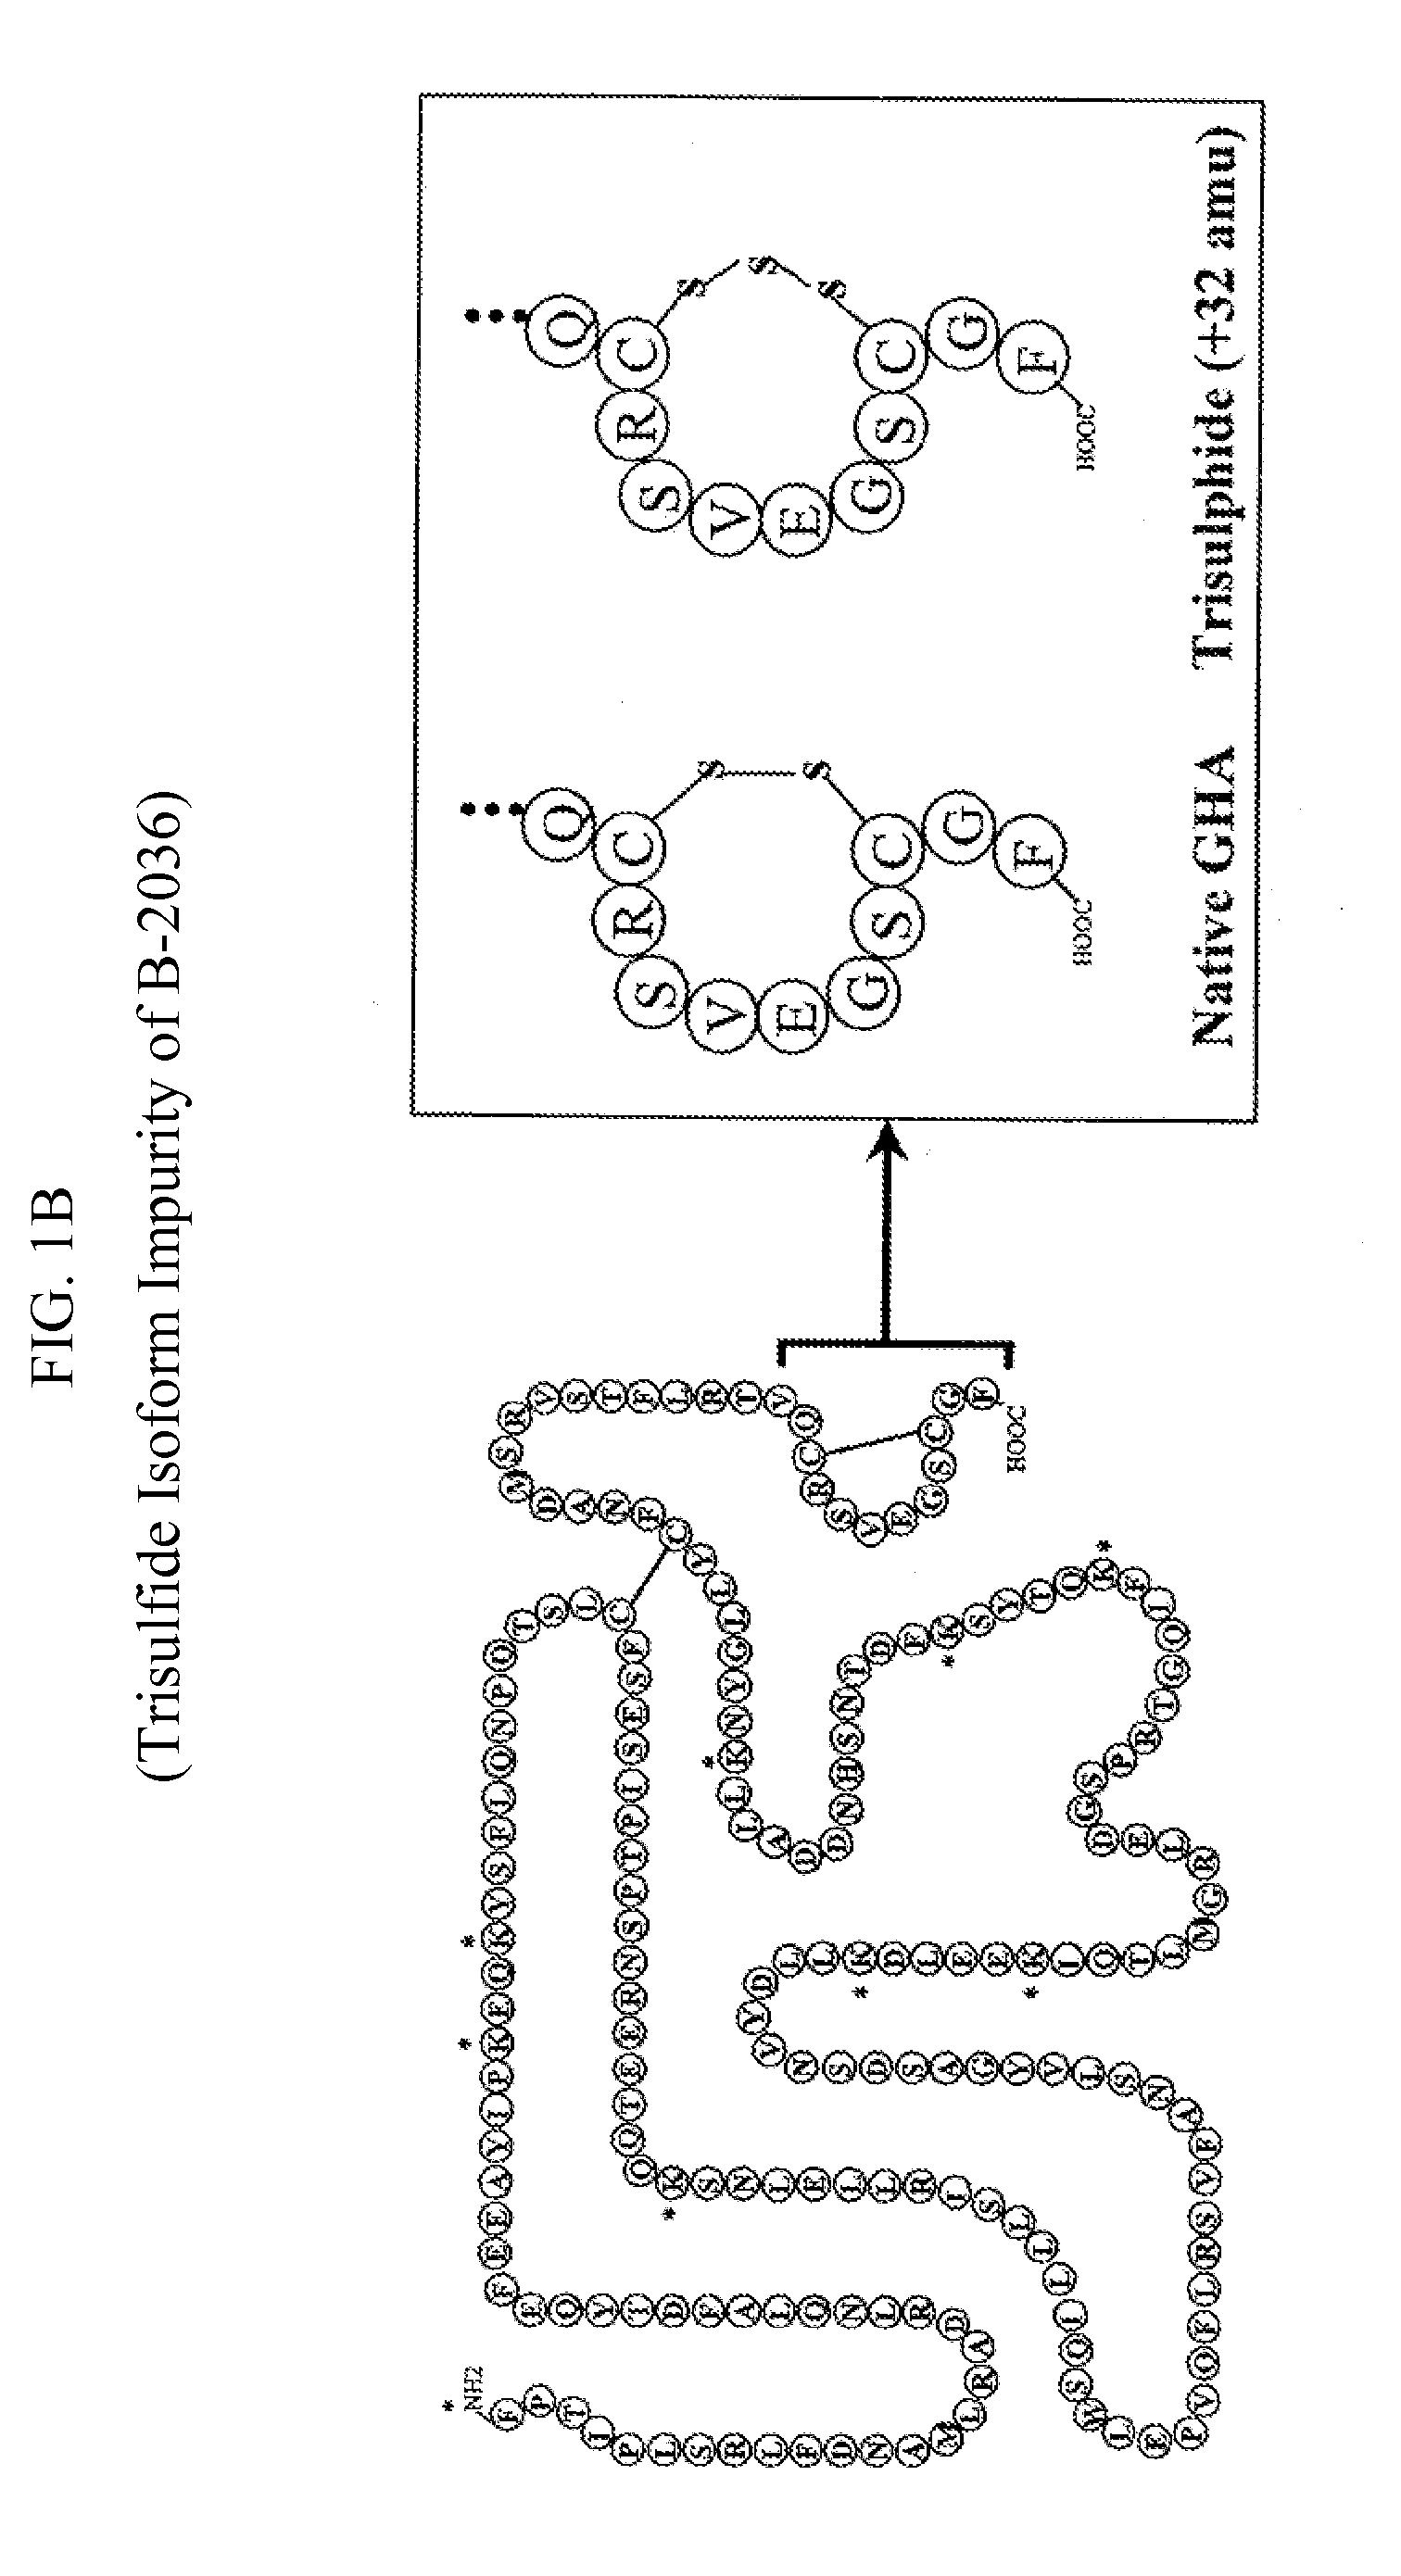 Method for the Preparation of Growth Hormone and Antagonist Thereof Having Lower Levels of Isoform Impurities Thereof